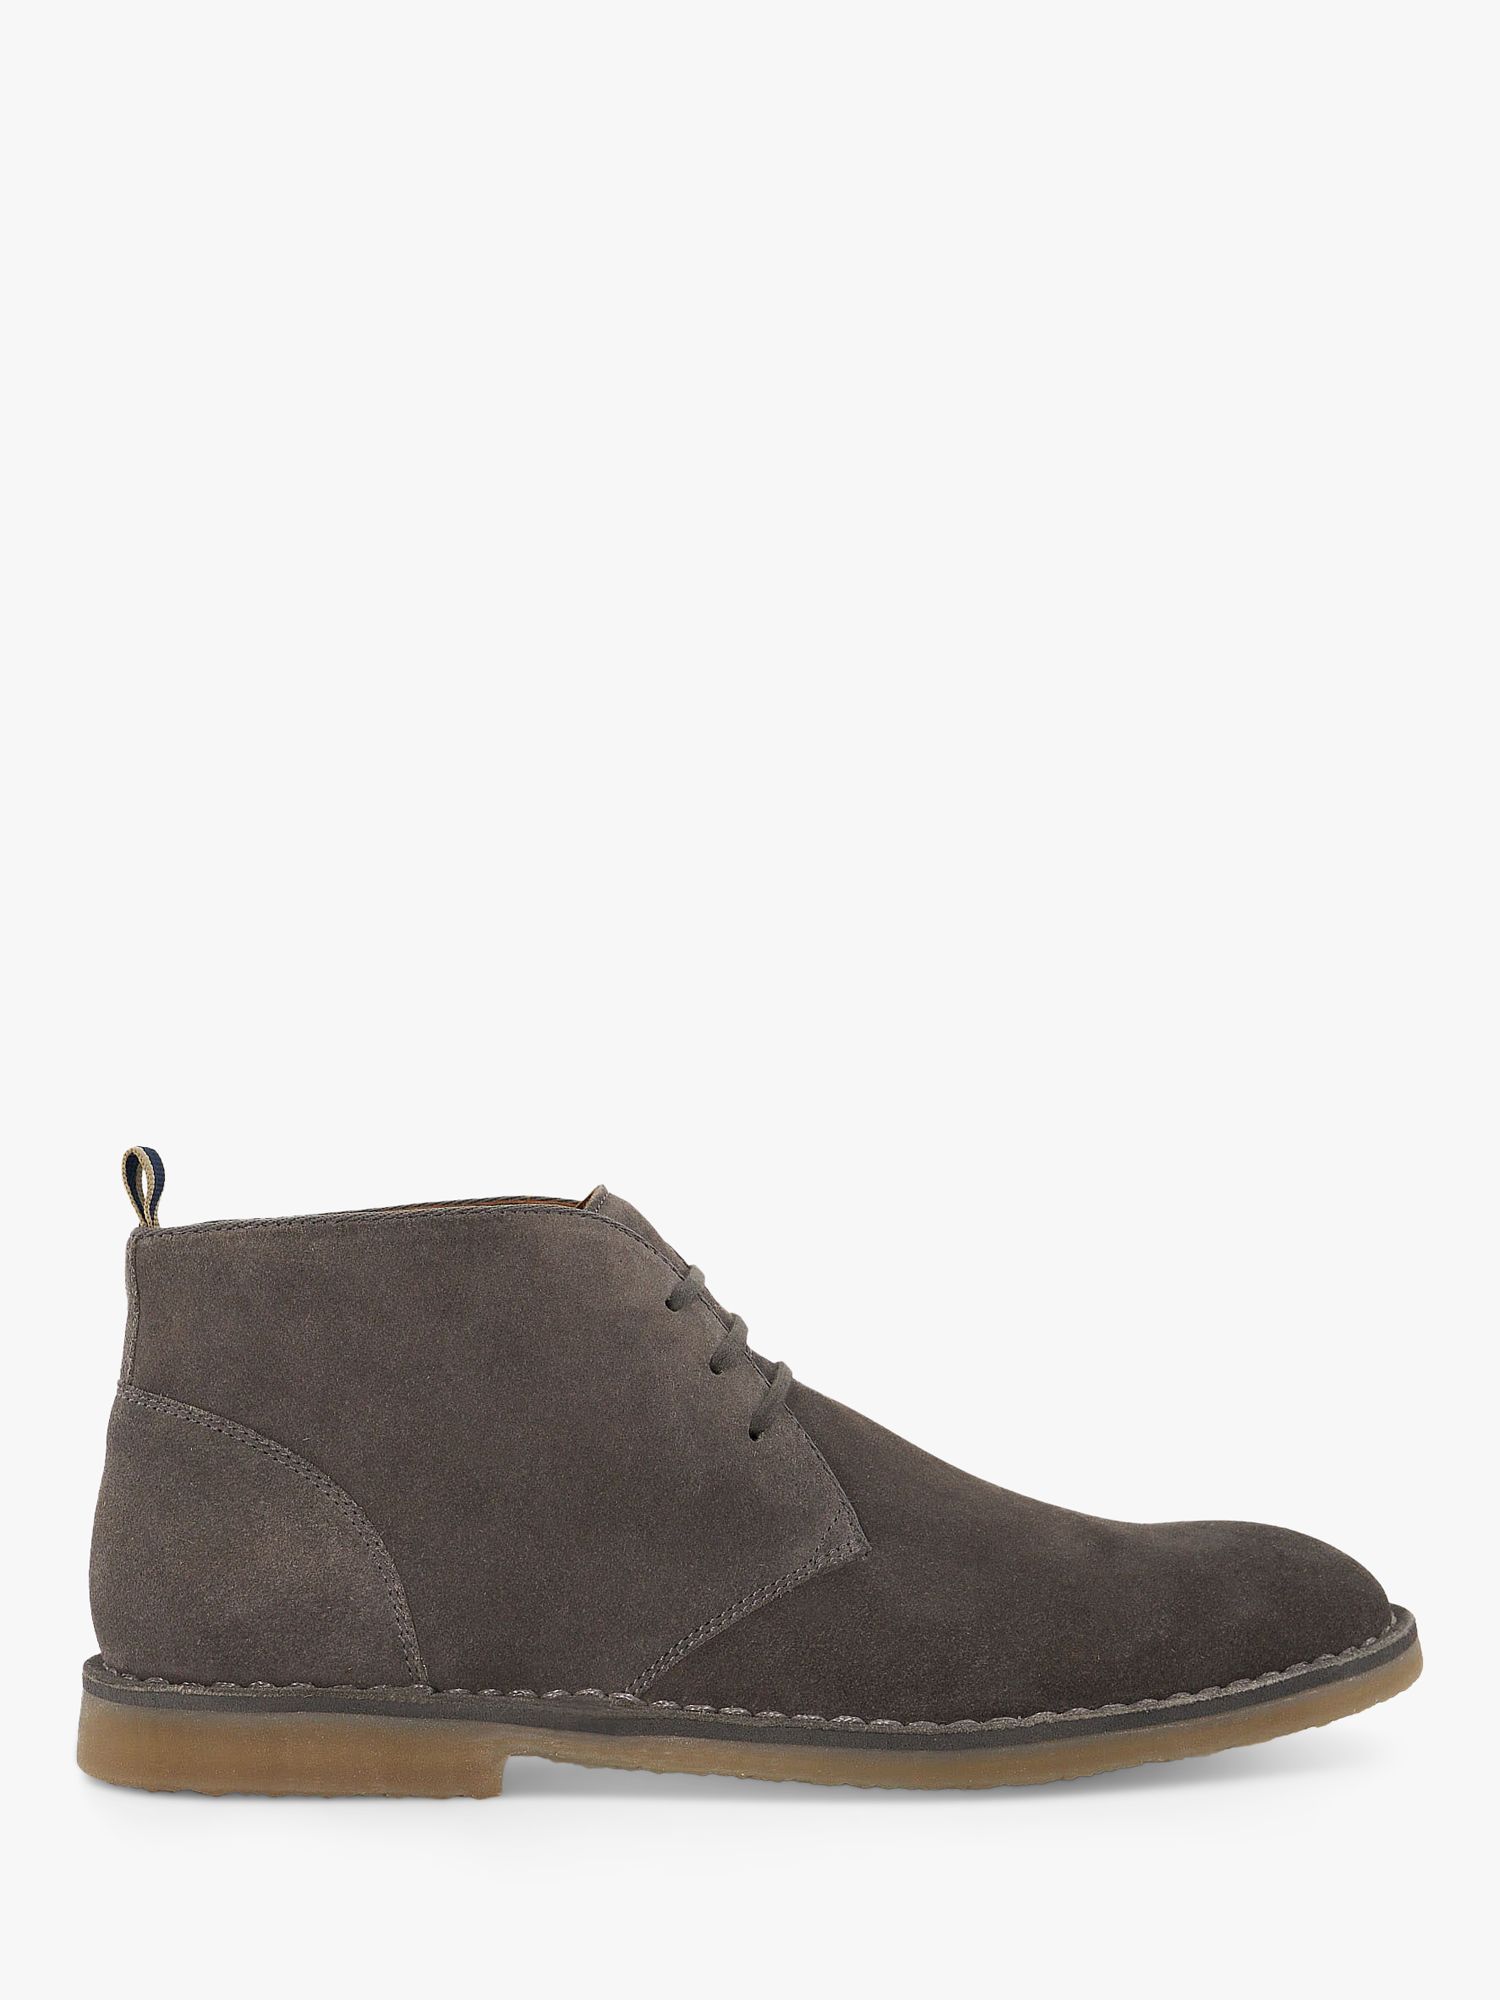 Dune Cashed Suede Casual Chukka Boots, Dark Grey-suede at John Lewis ...